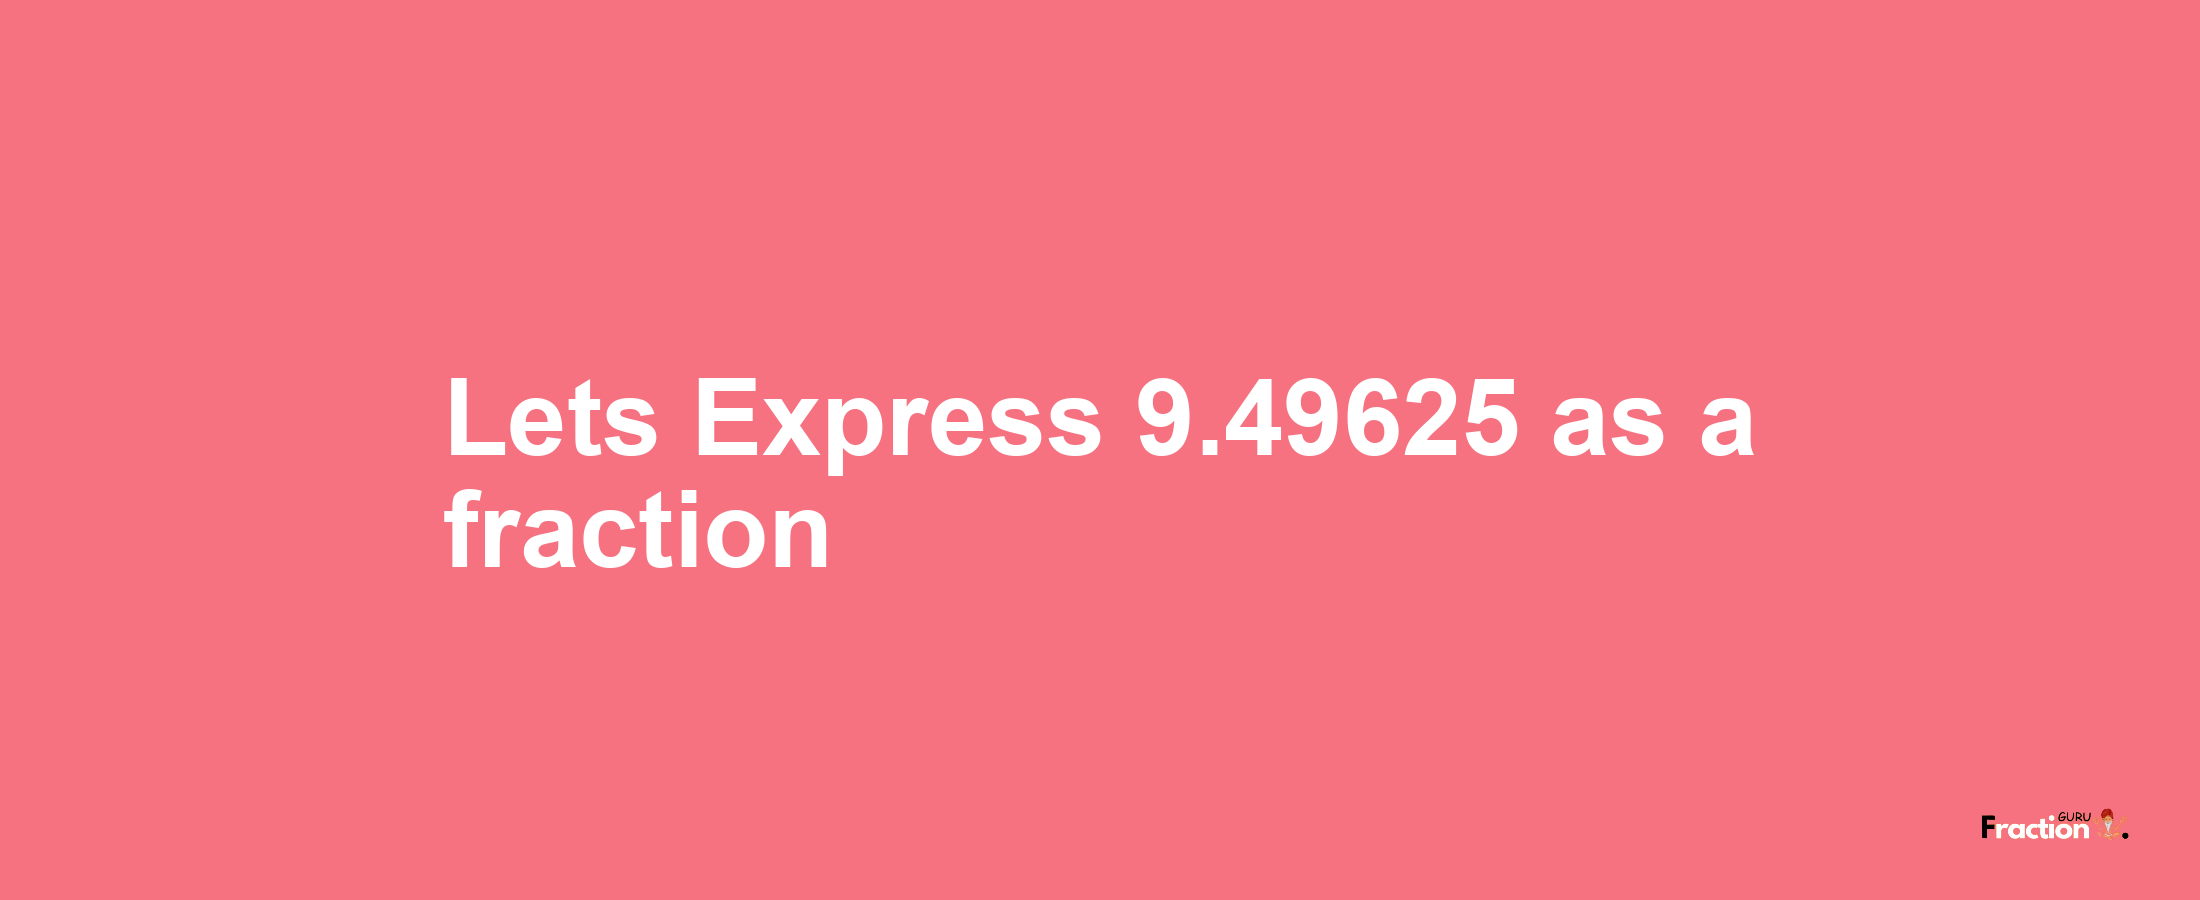 Lets Express 9.49625 as afraction